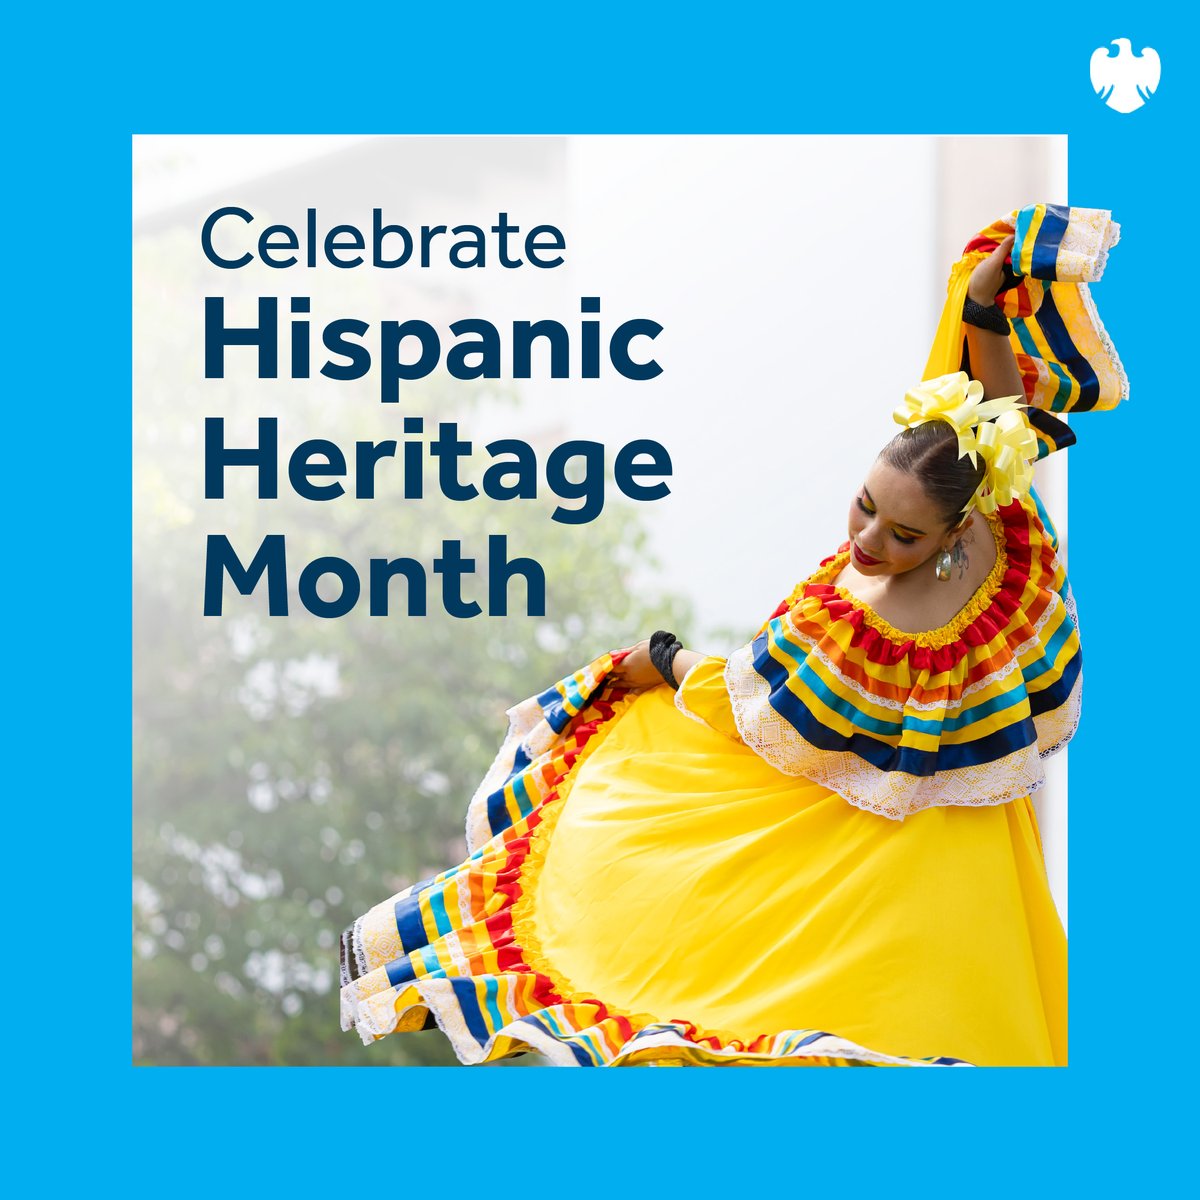 Join us in celebrating the rich and diverse culture of Hispanic Americans. With a tapestry of nations and cultures that create a beautiful mosaic of diversity and unity, their contributions are honored all month long.